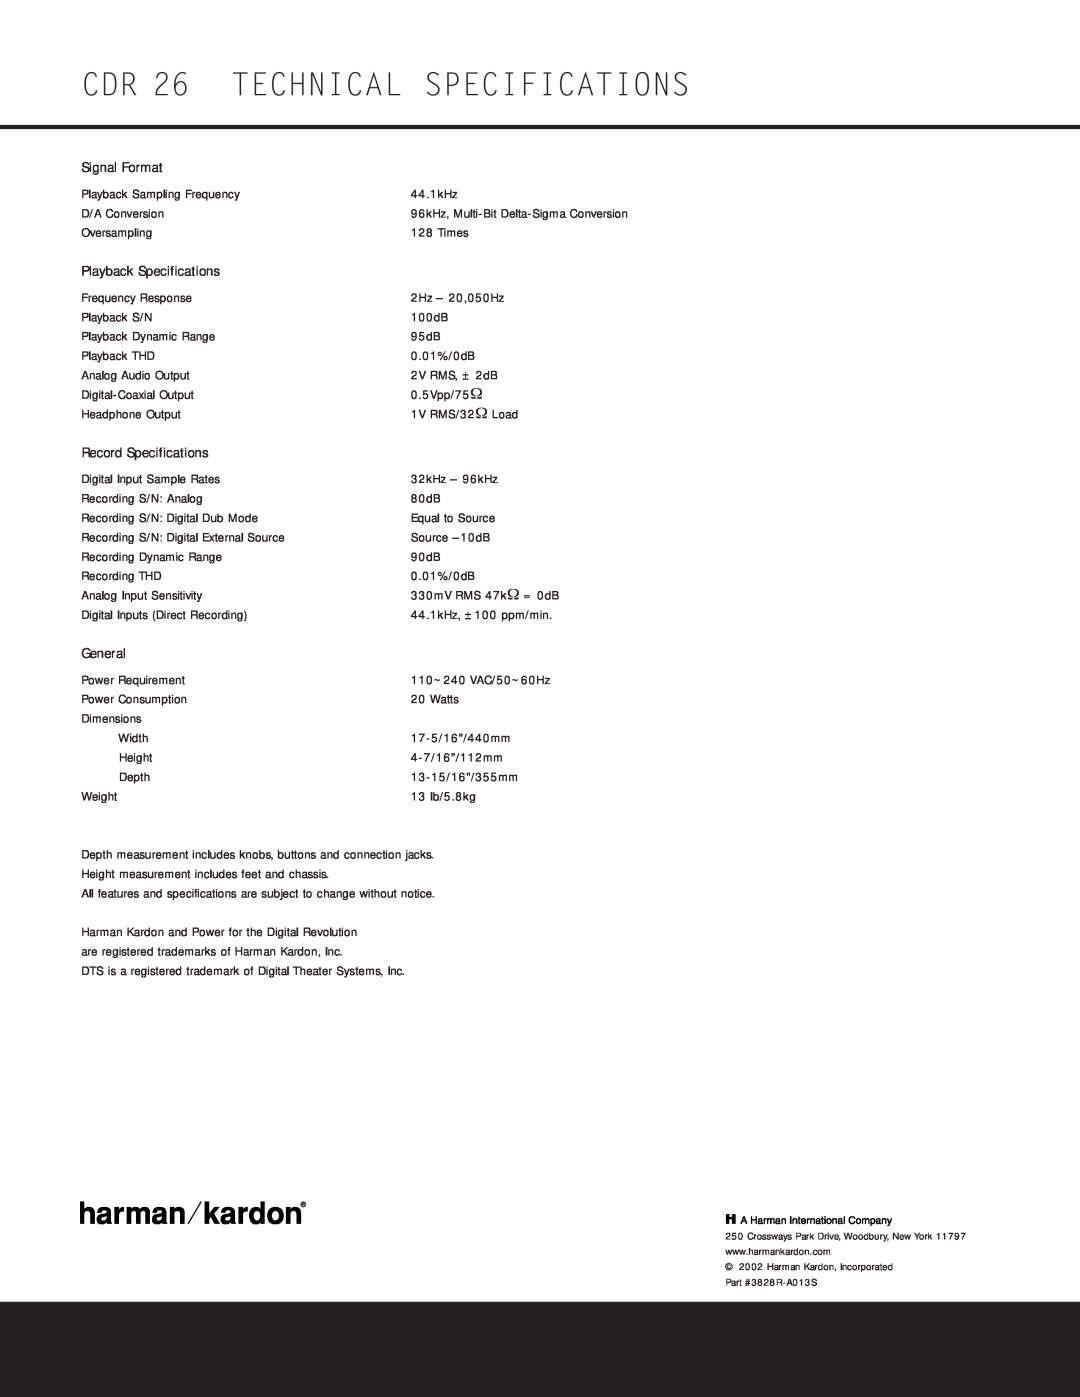 Harman-Kardon owner manual CDR 26 TECHNICAL SPECIFICATIONS 